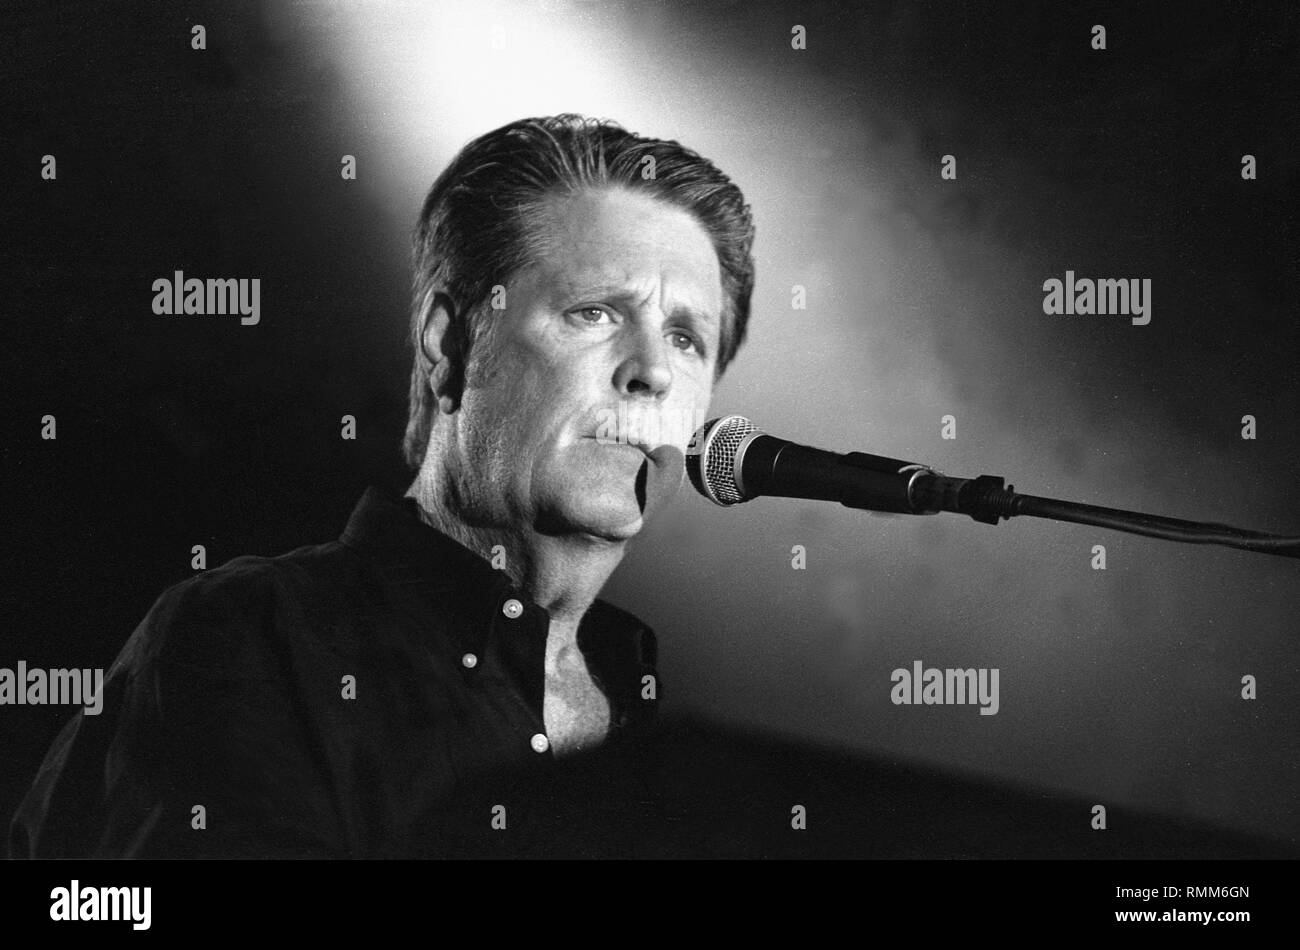 Grammy Award winning musician Brian Wilson, best known as the leader and chief songwriter of the Beach Boys, is shown performing on stage during a 'live' concert appearance. Stock Photo